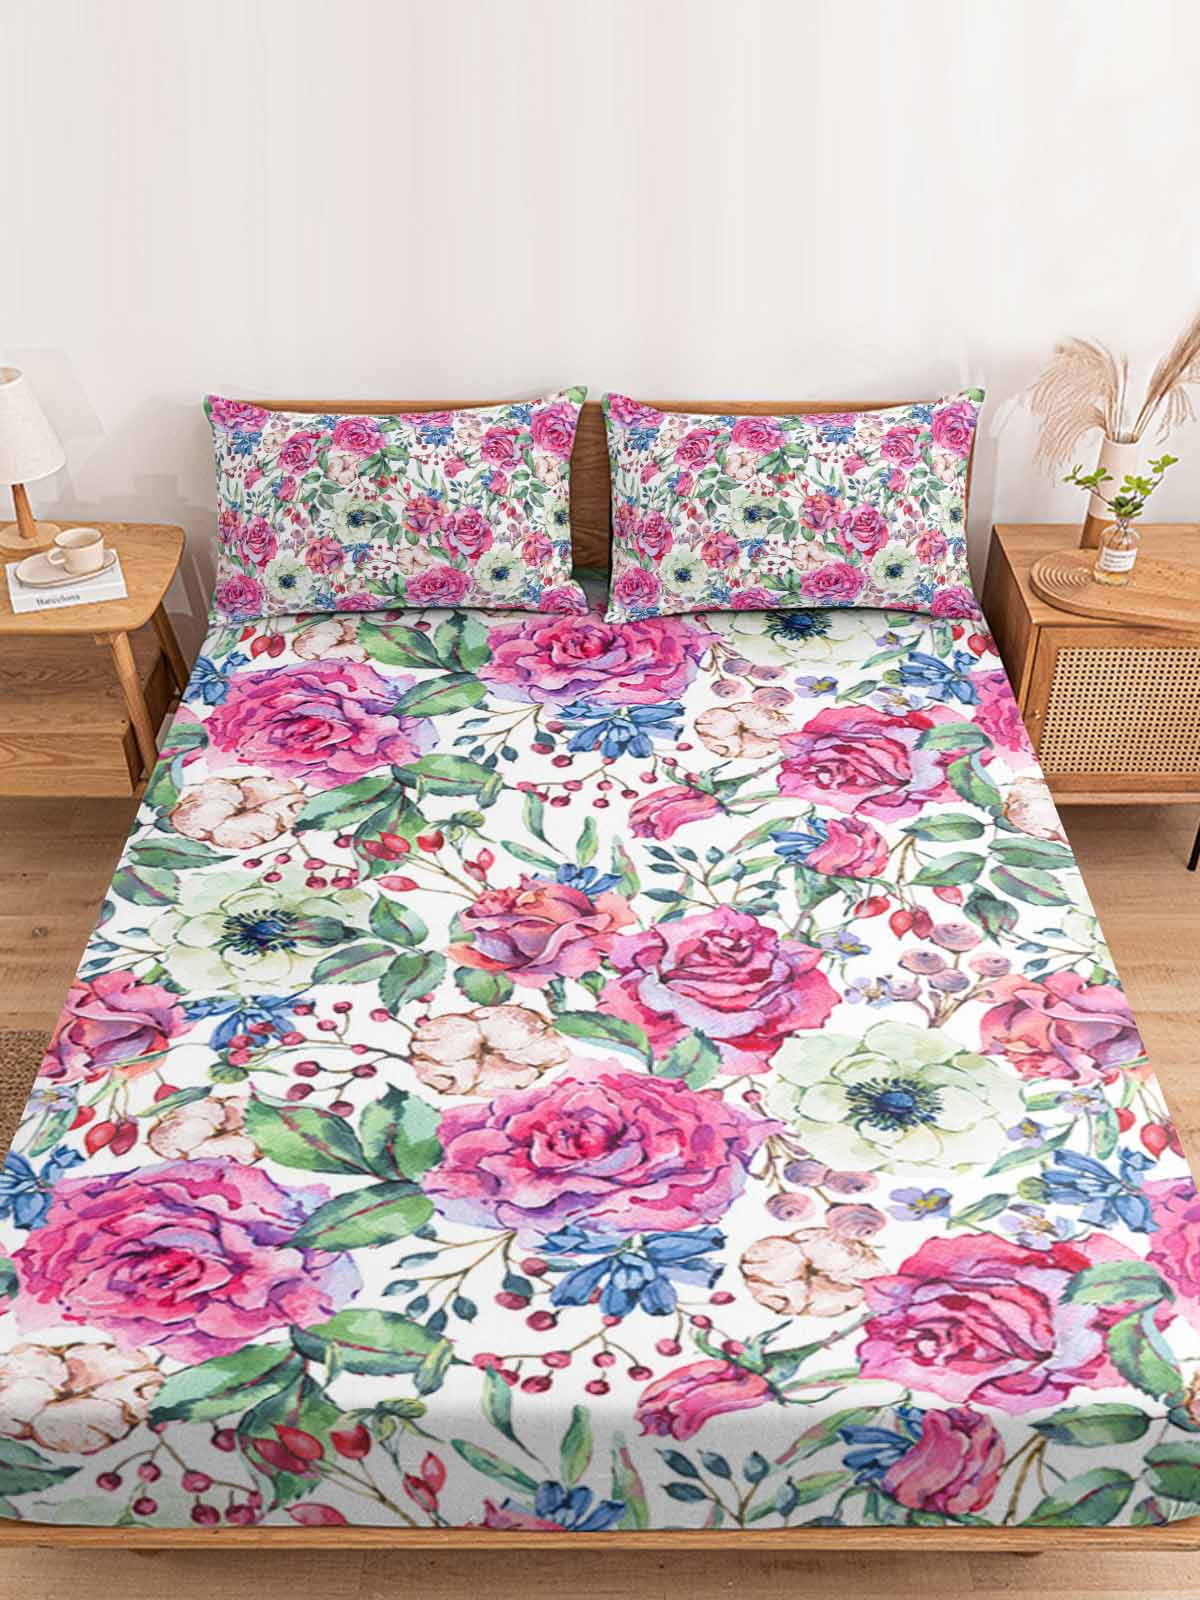 Watercolor Flower Rose Wild Fruit Fitted Bed Sheet Cover Elastic Band ...